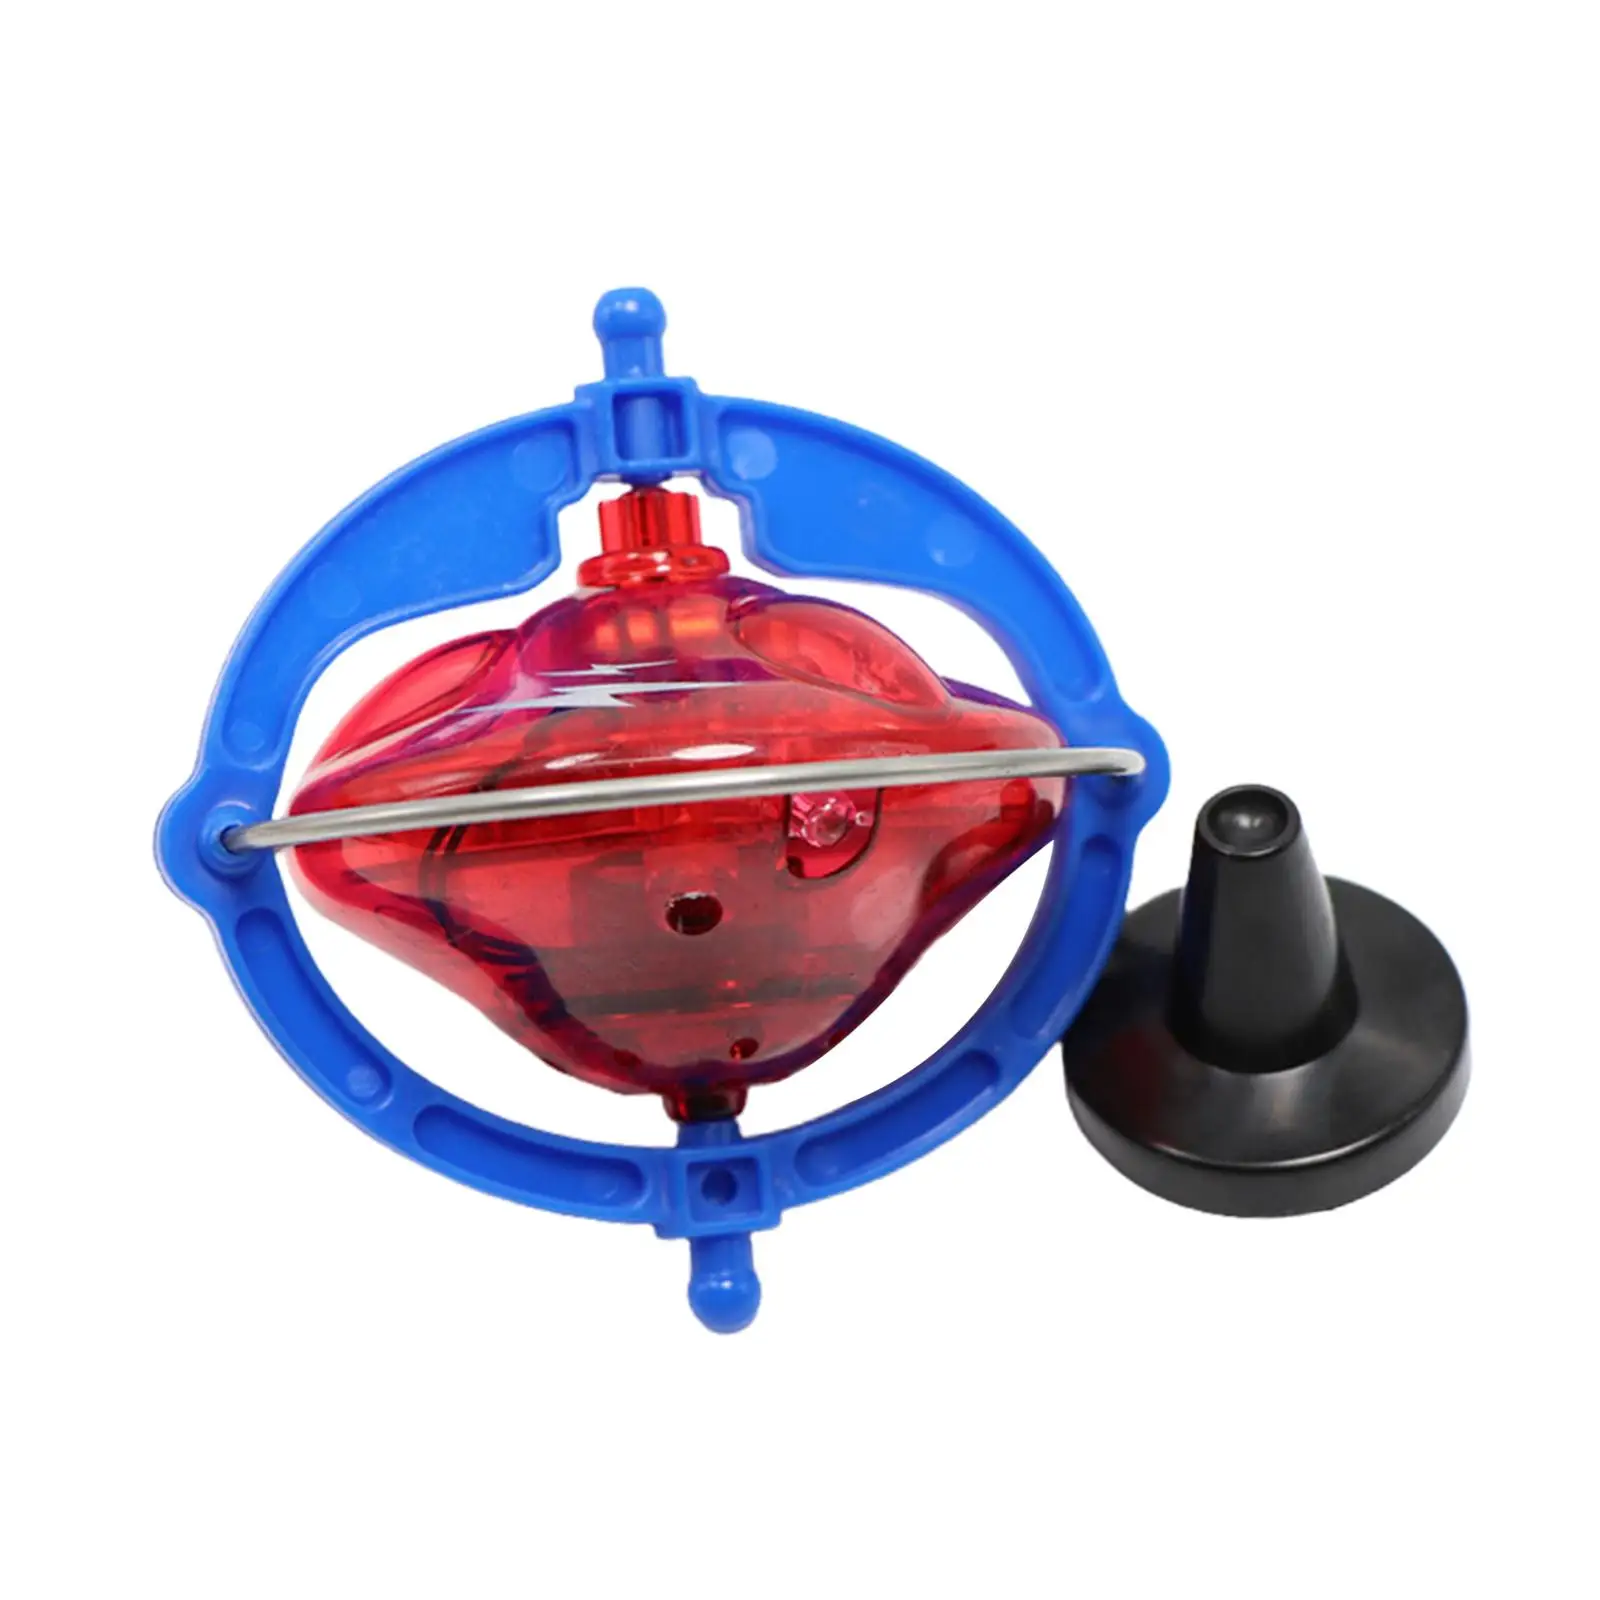 Music Gyro Gyroscope Kids Toys Rotating Top Novelty Flashing Rotating Lights Toy for Party Favors Birthday